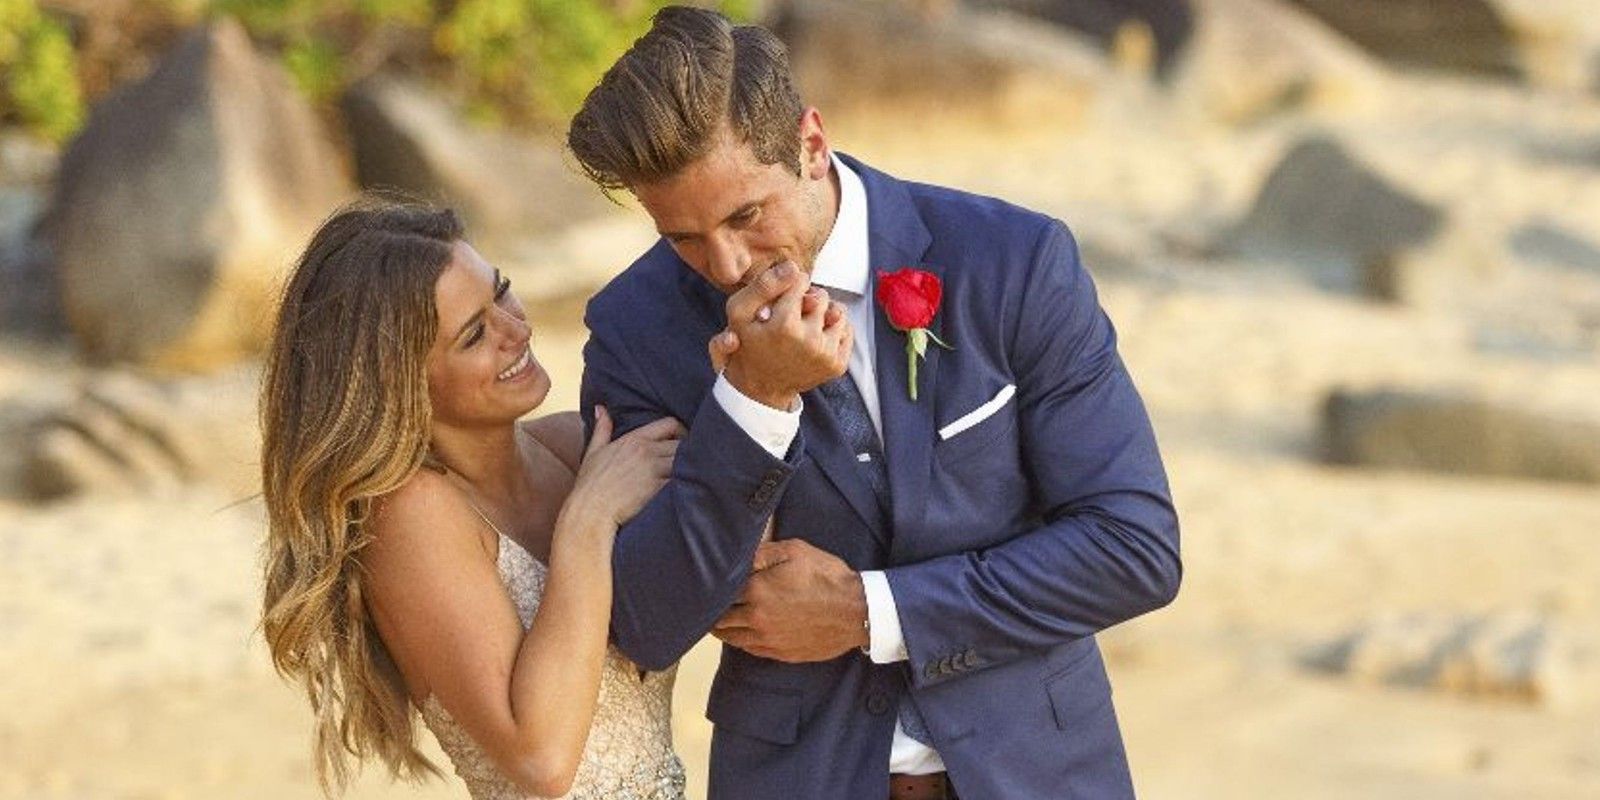 JoJo and Jordan Get Engaged 3 Years After Bachelorette Finale